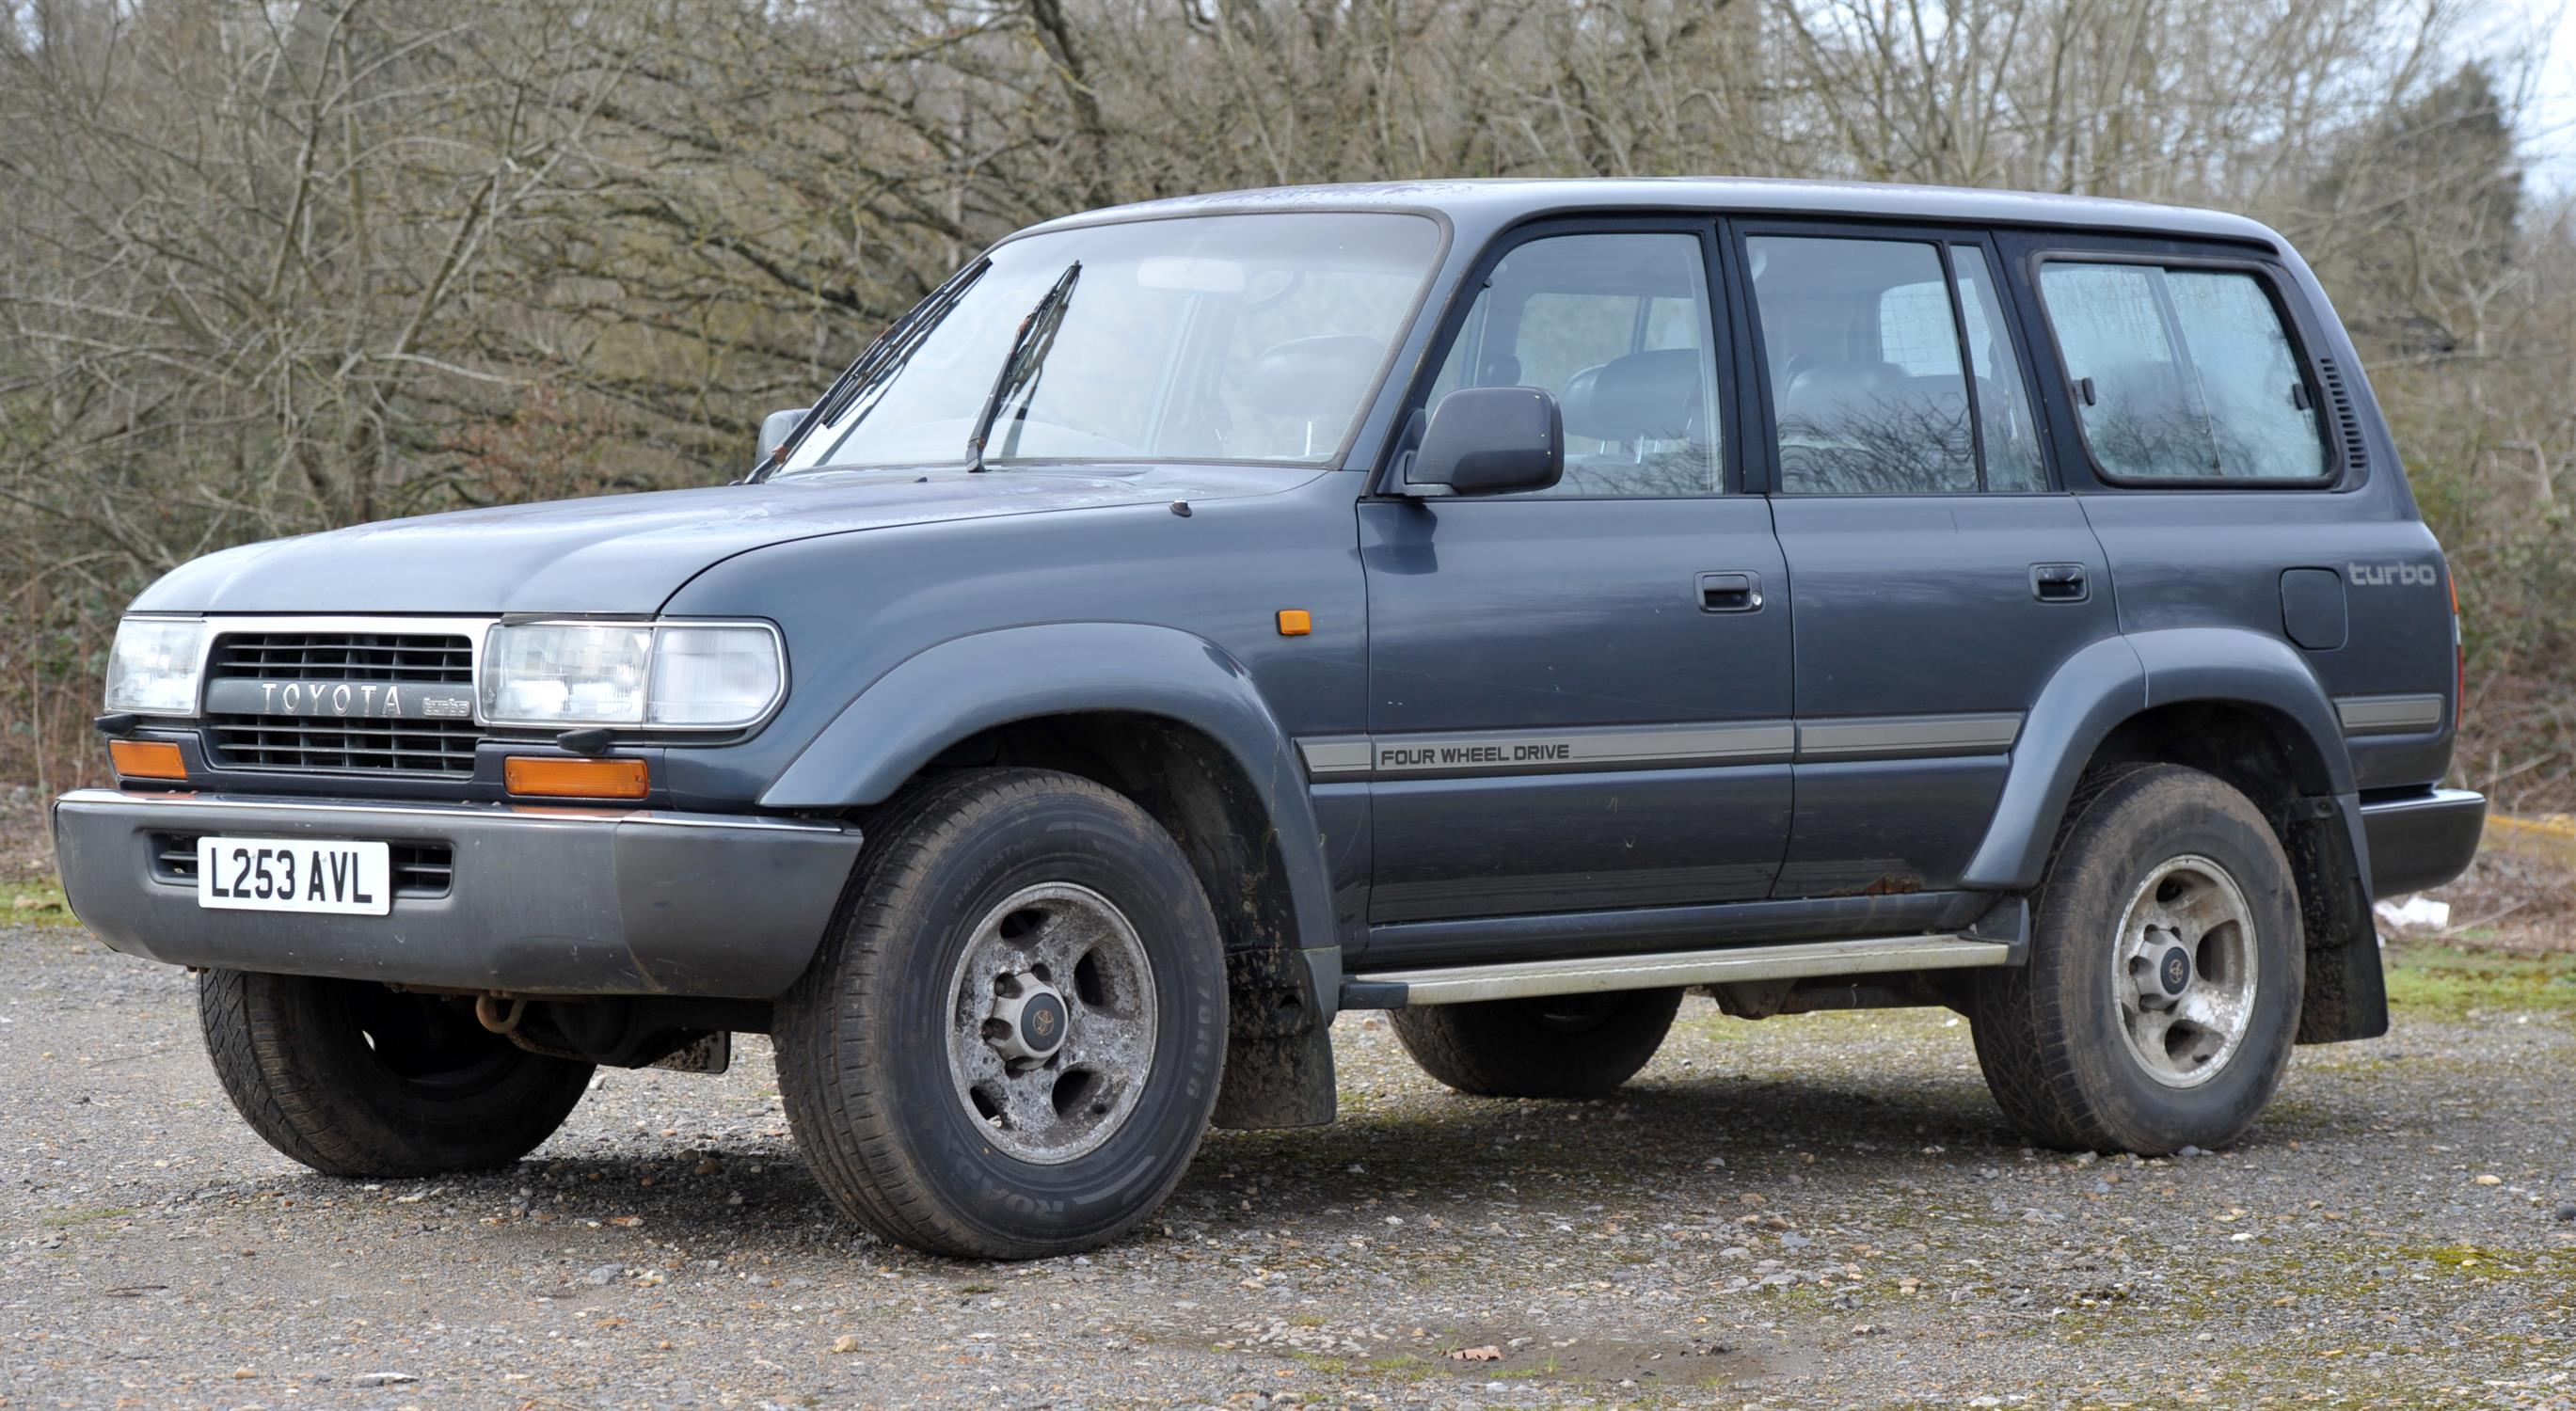 1993 Toyota Land Cruiser VX 80 series 4.2 Diesel Automatic. Registration number: L253 ABL. - Image 4 of 14